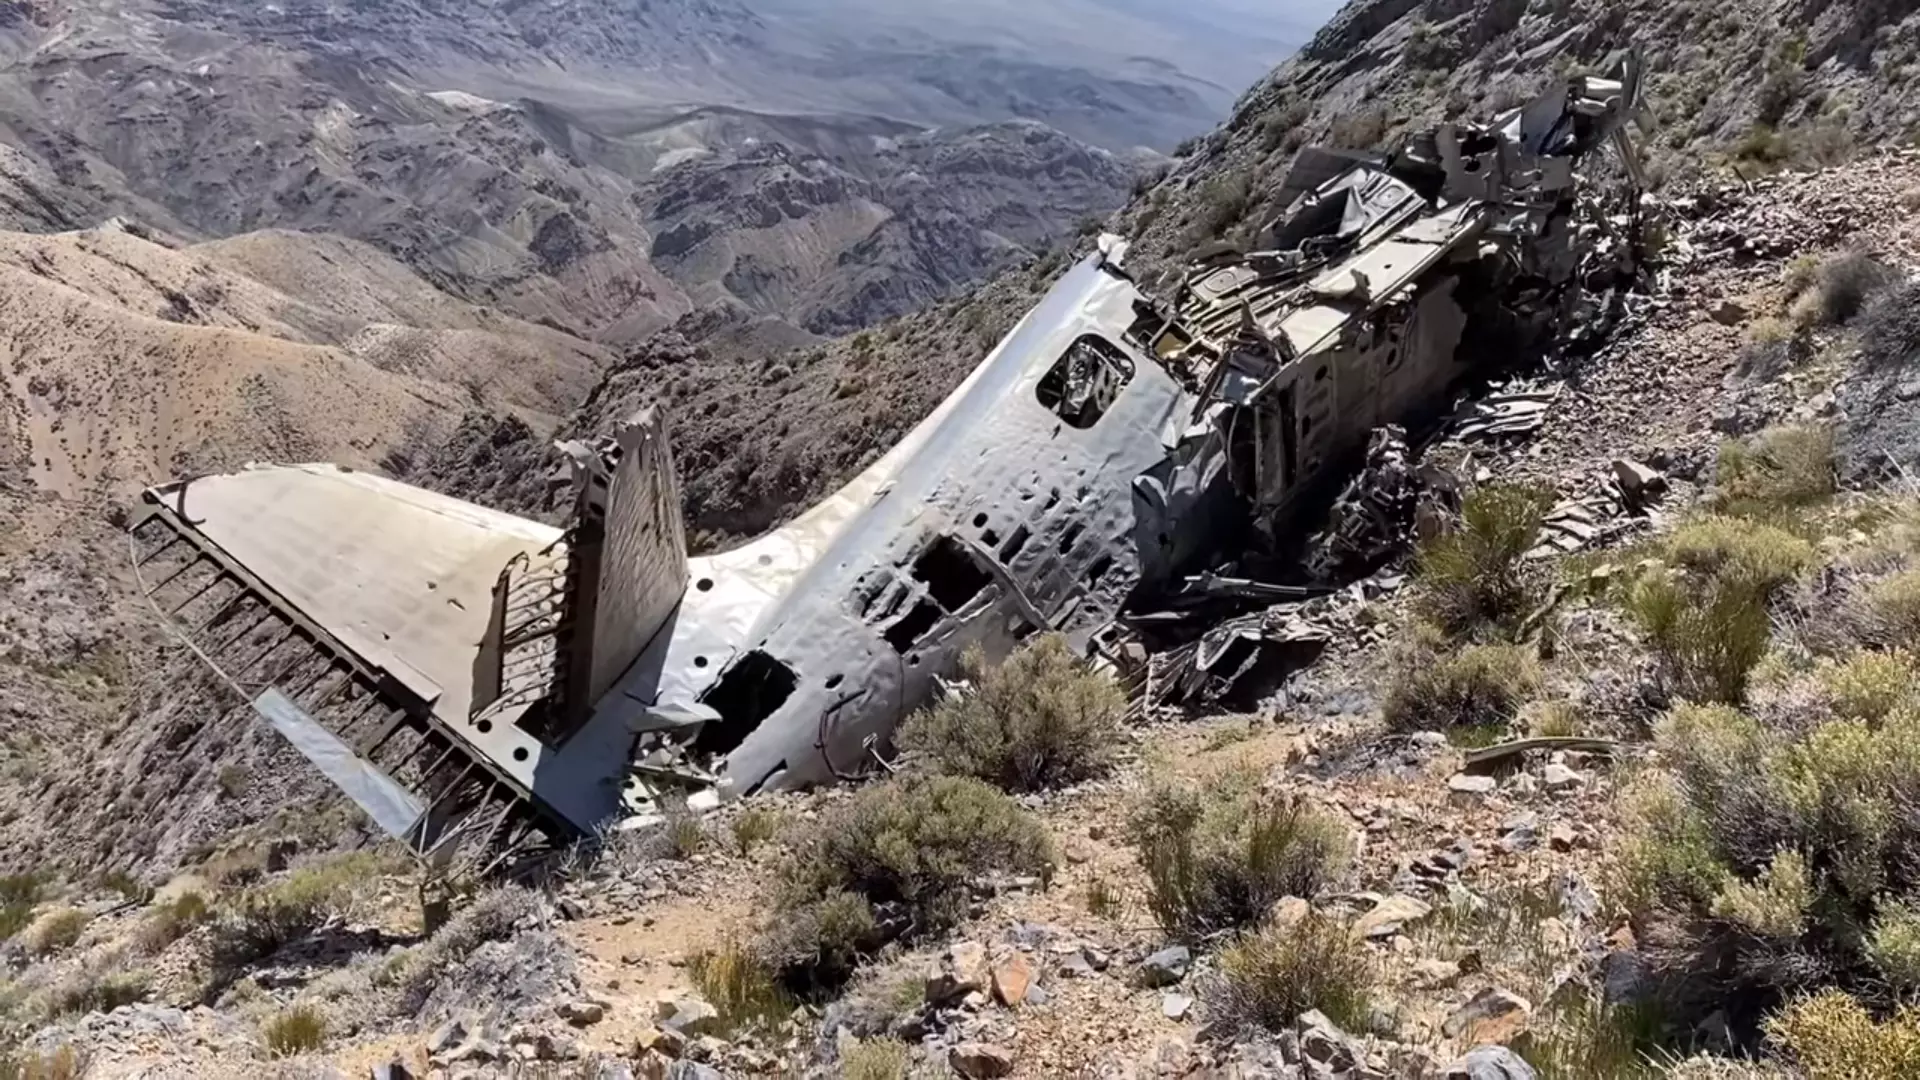 Botanist Discovers Wreckage Of Cold War Era Aircraft In Death Valley